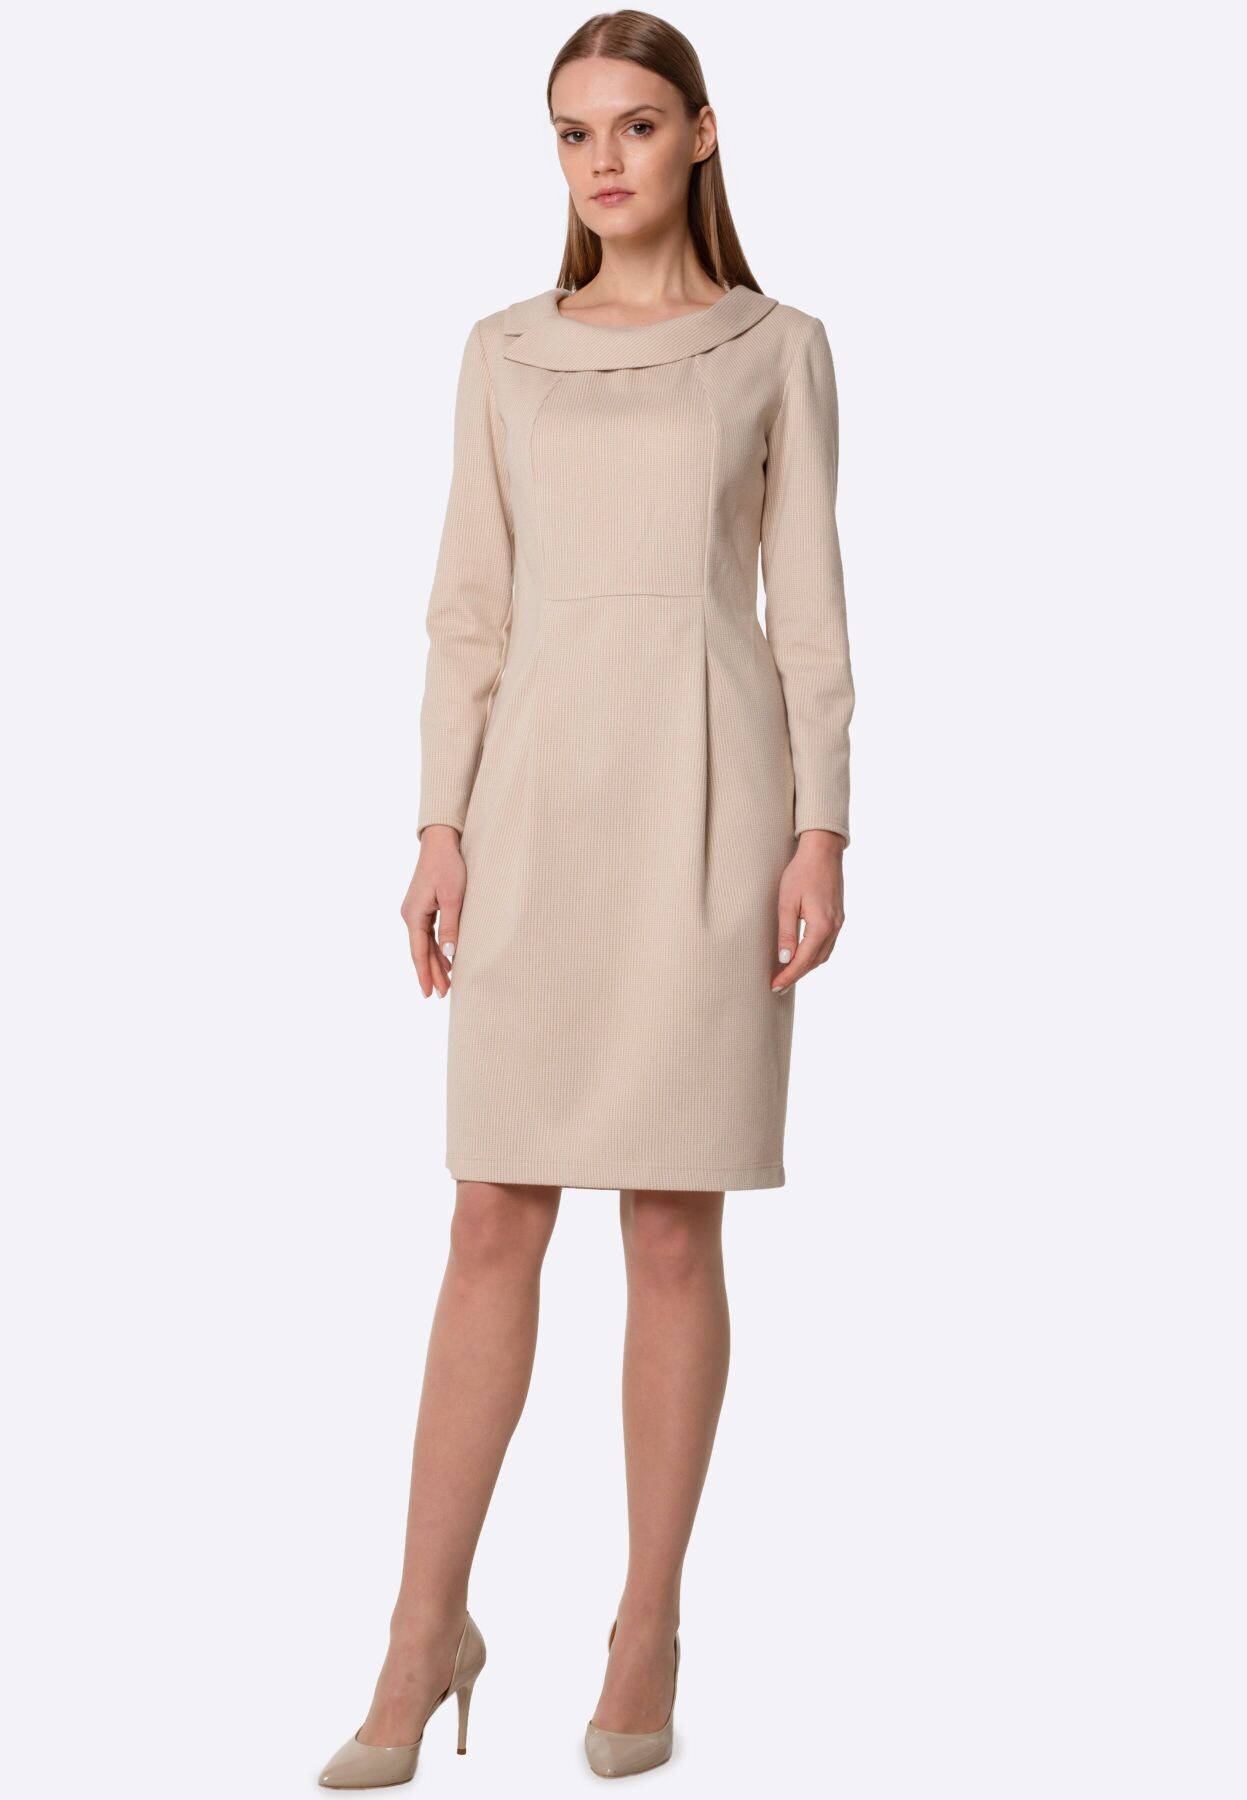 Warm dress with a decorative stand-up collar in ivory 5685